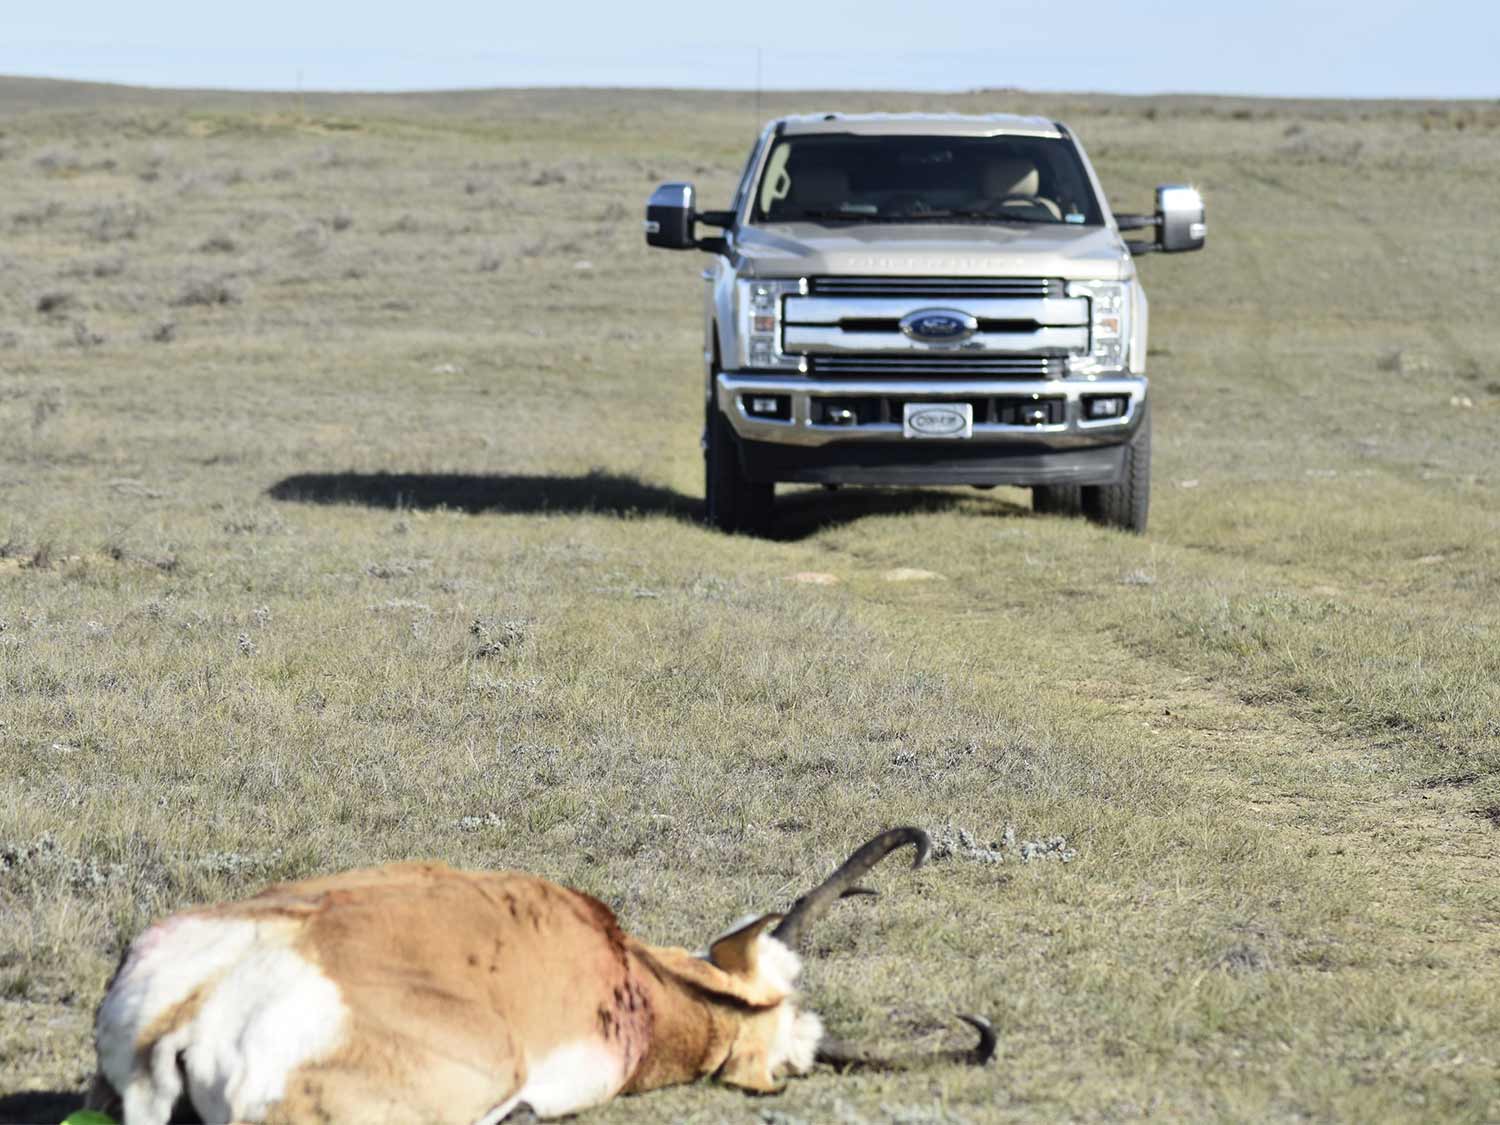 A truck drives up on a dropped antelope on the ground.